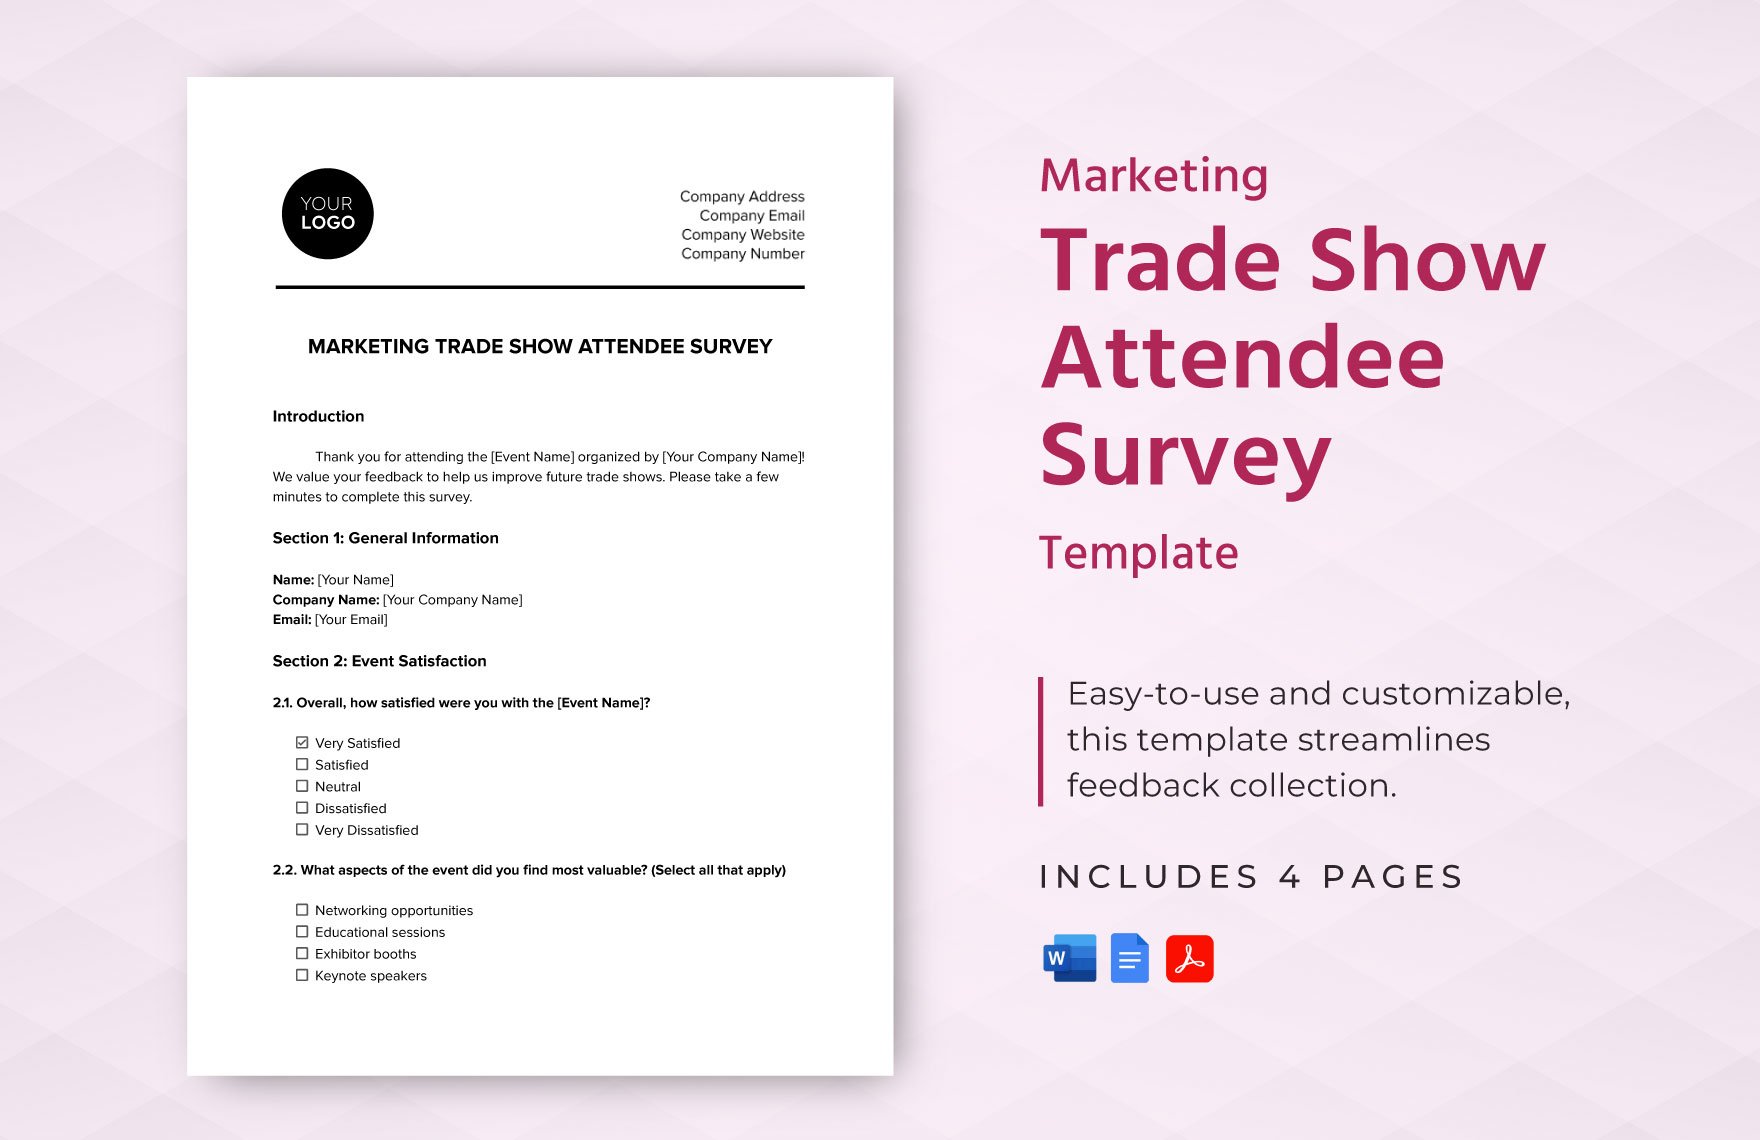 Marketing Trade Show Attendee Survey Template